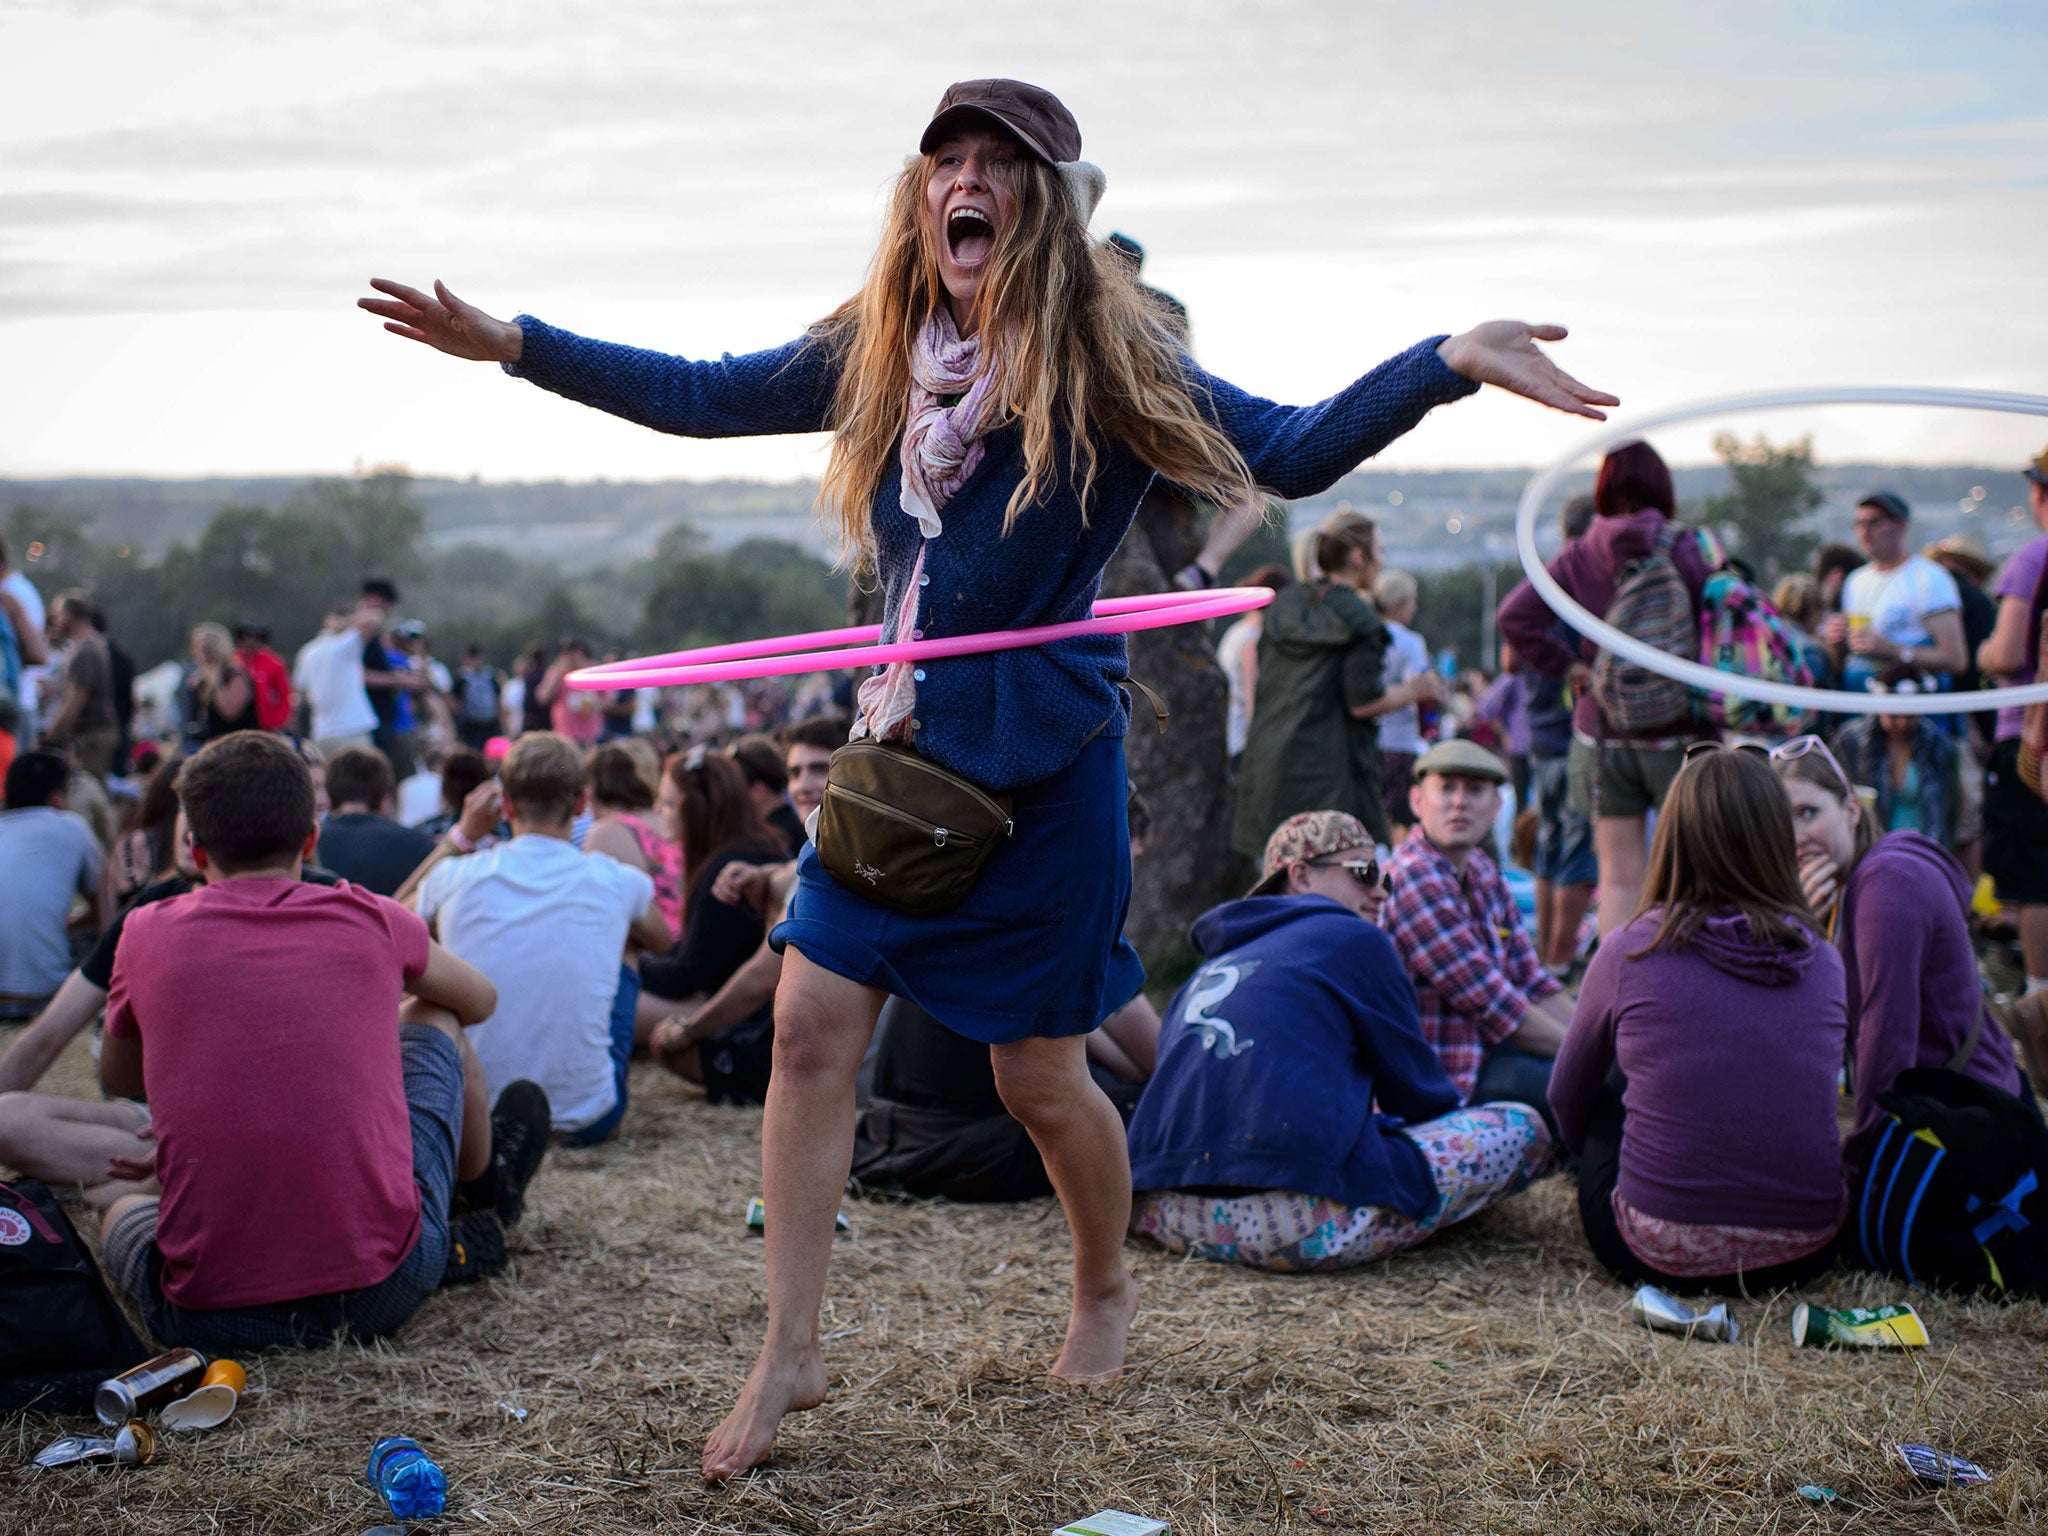 Follow our Glastonbury survival tips and you can be this happy too